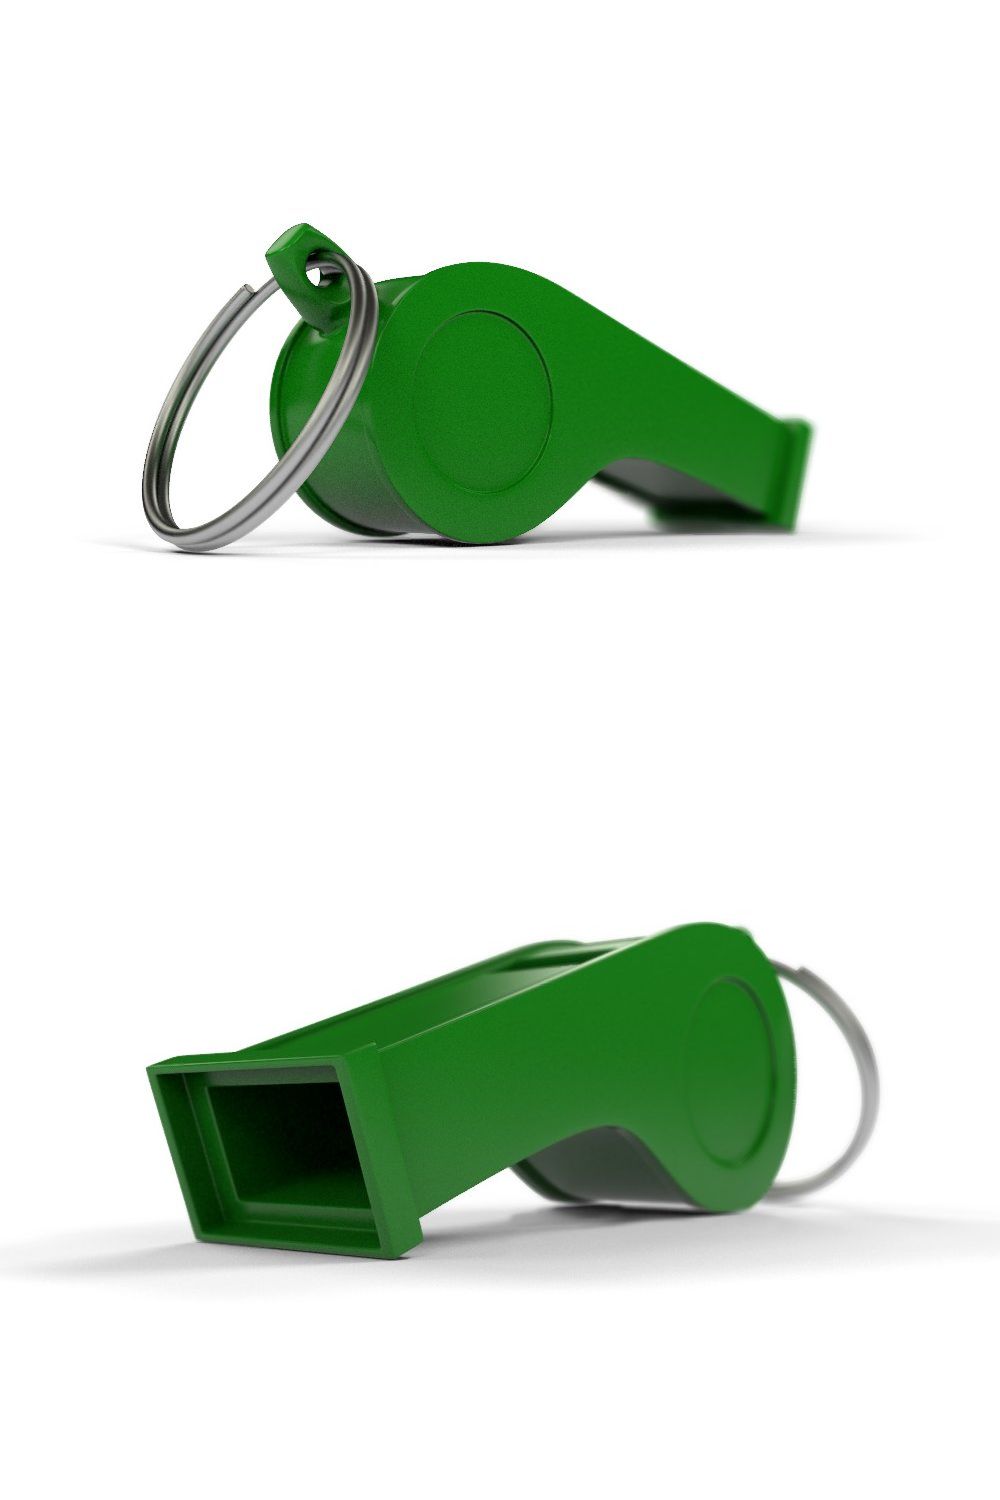 Whistle pinterest preview image.